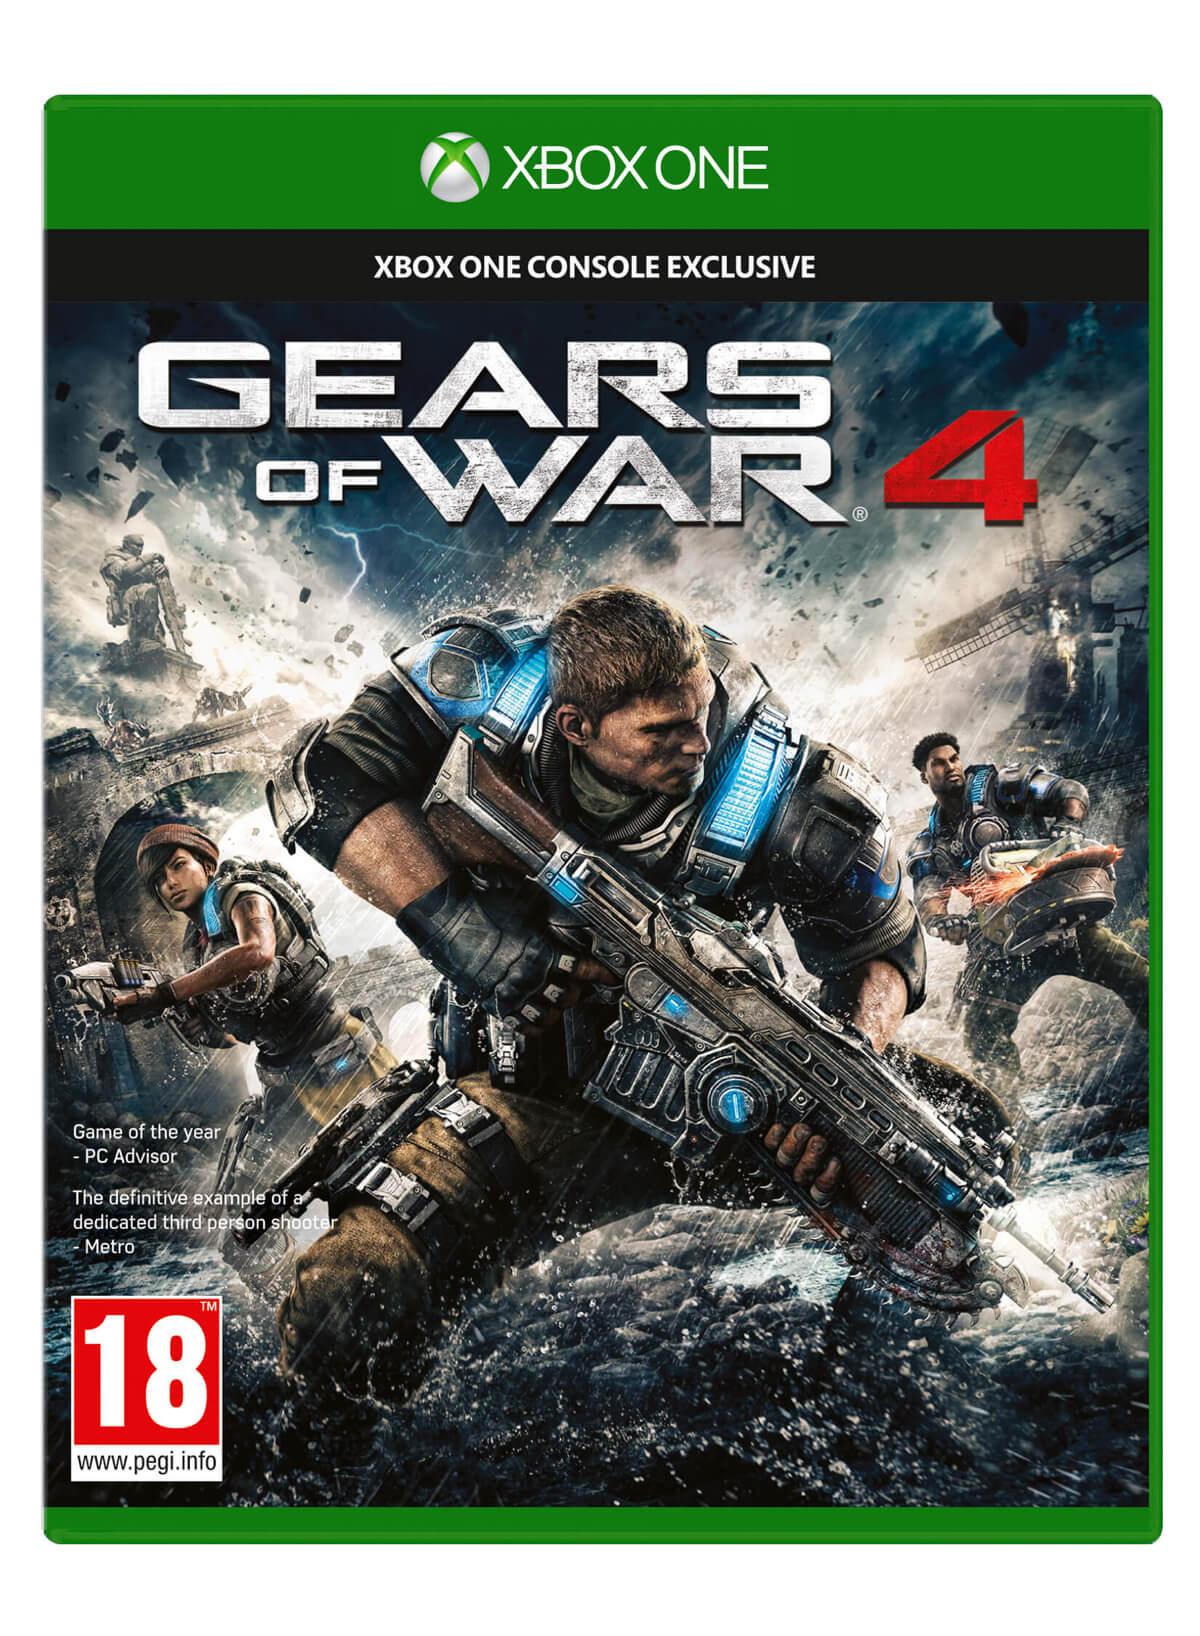 [Xbox GAMES] Gears of War 4 (Xbox One X)